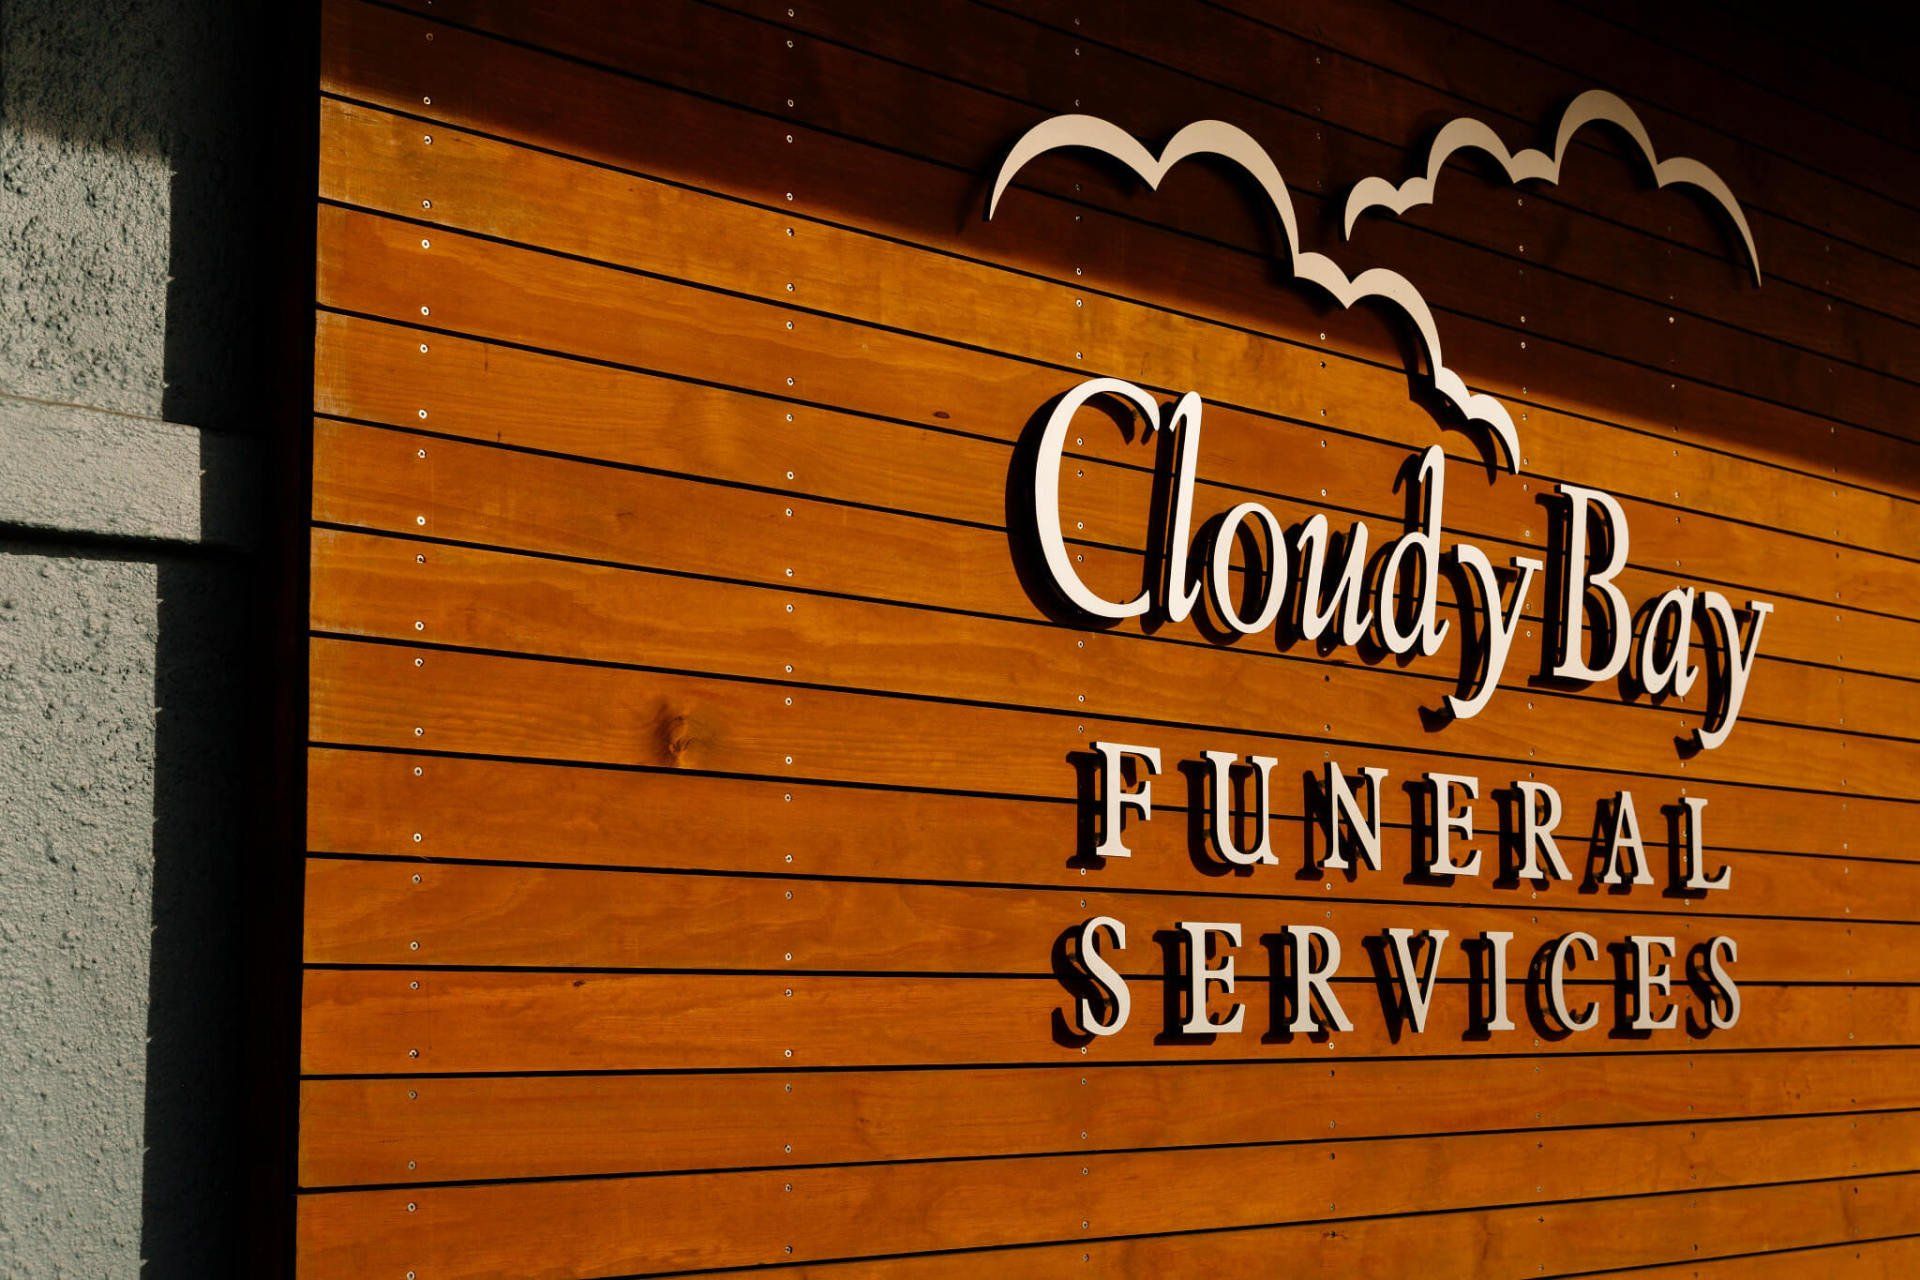 Cloudy Bay Funeral Services